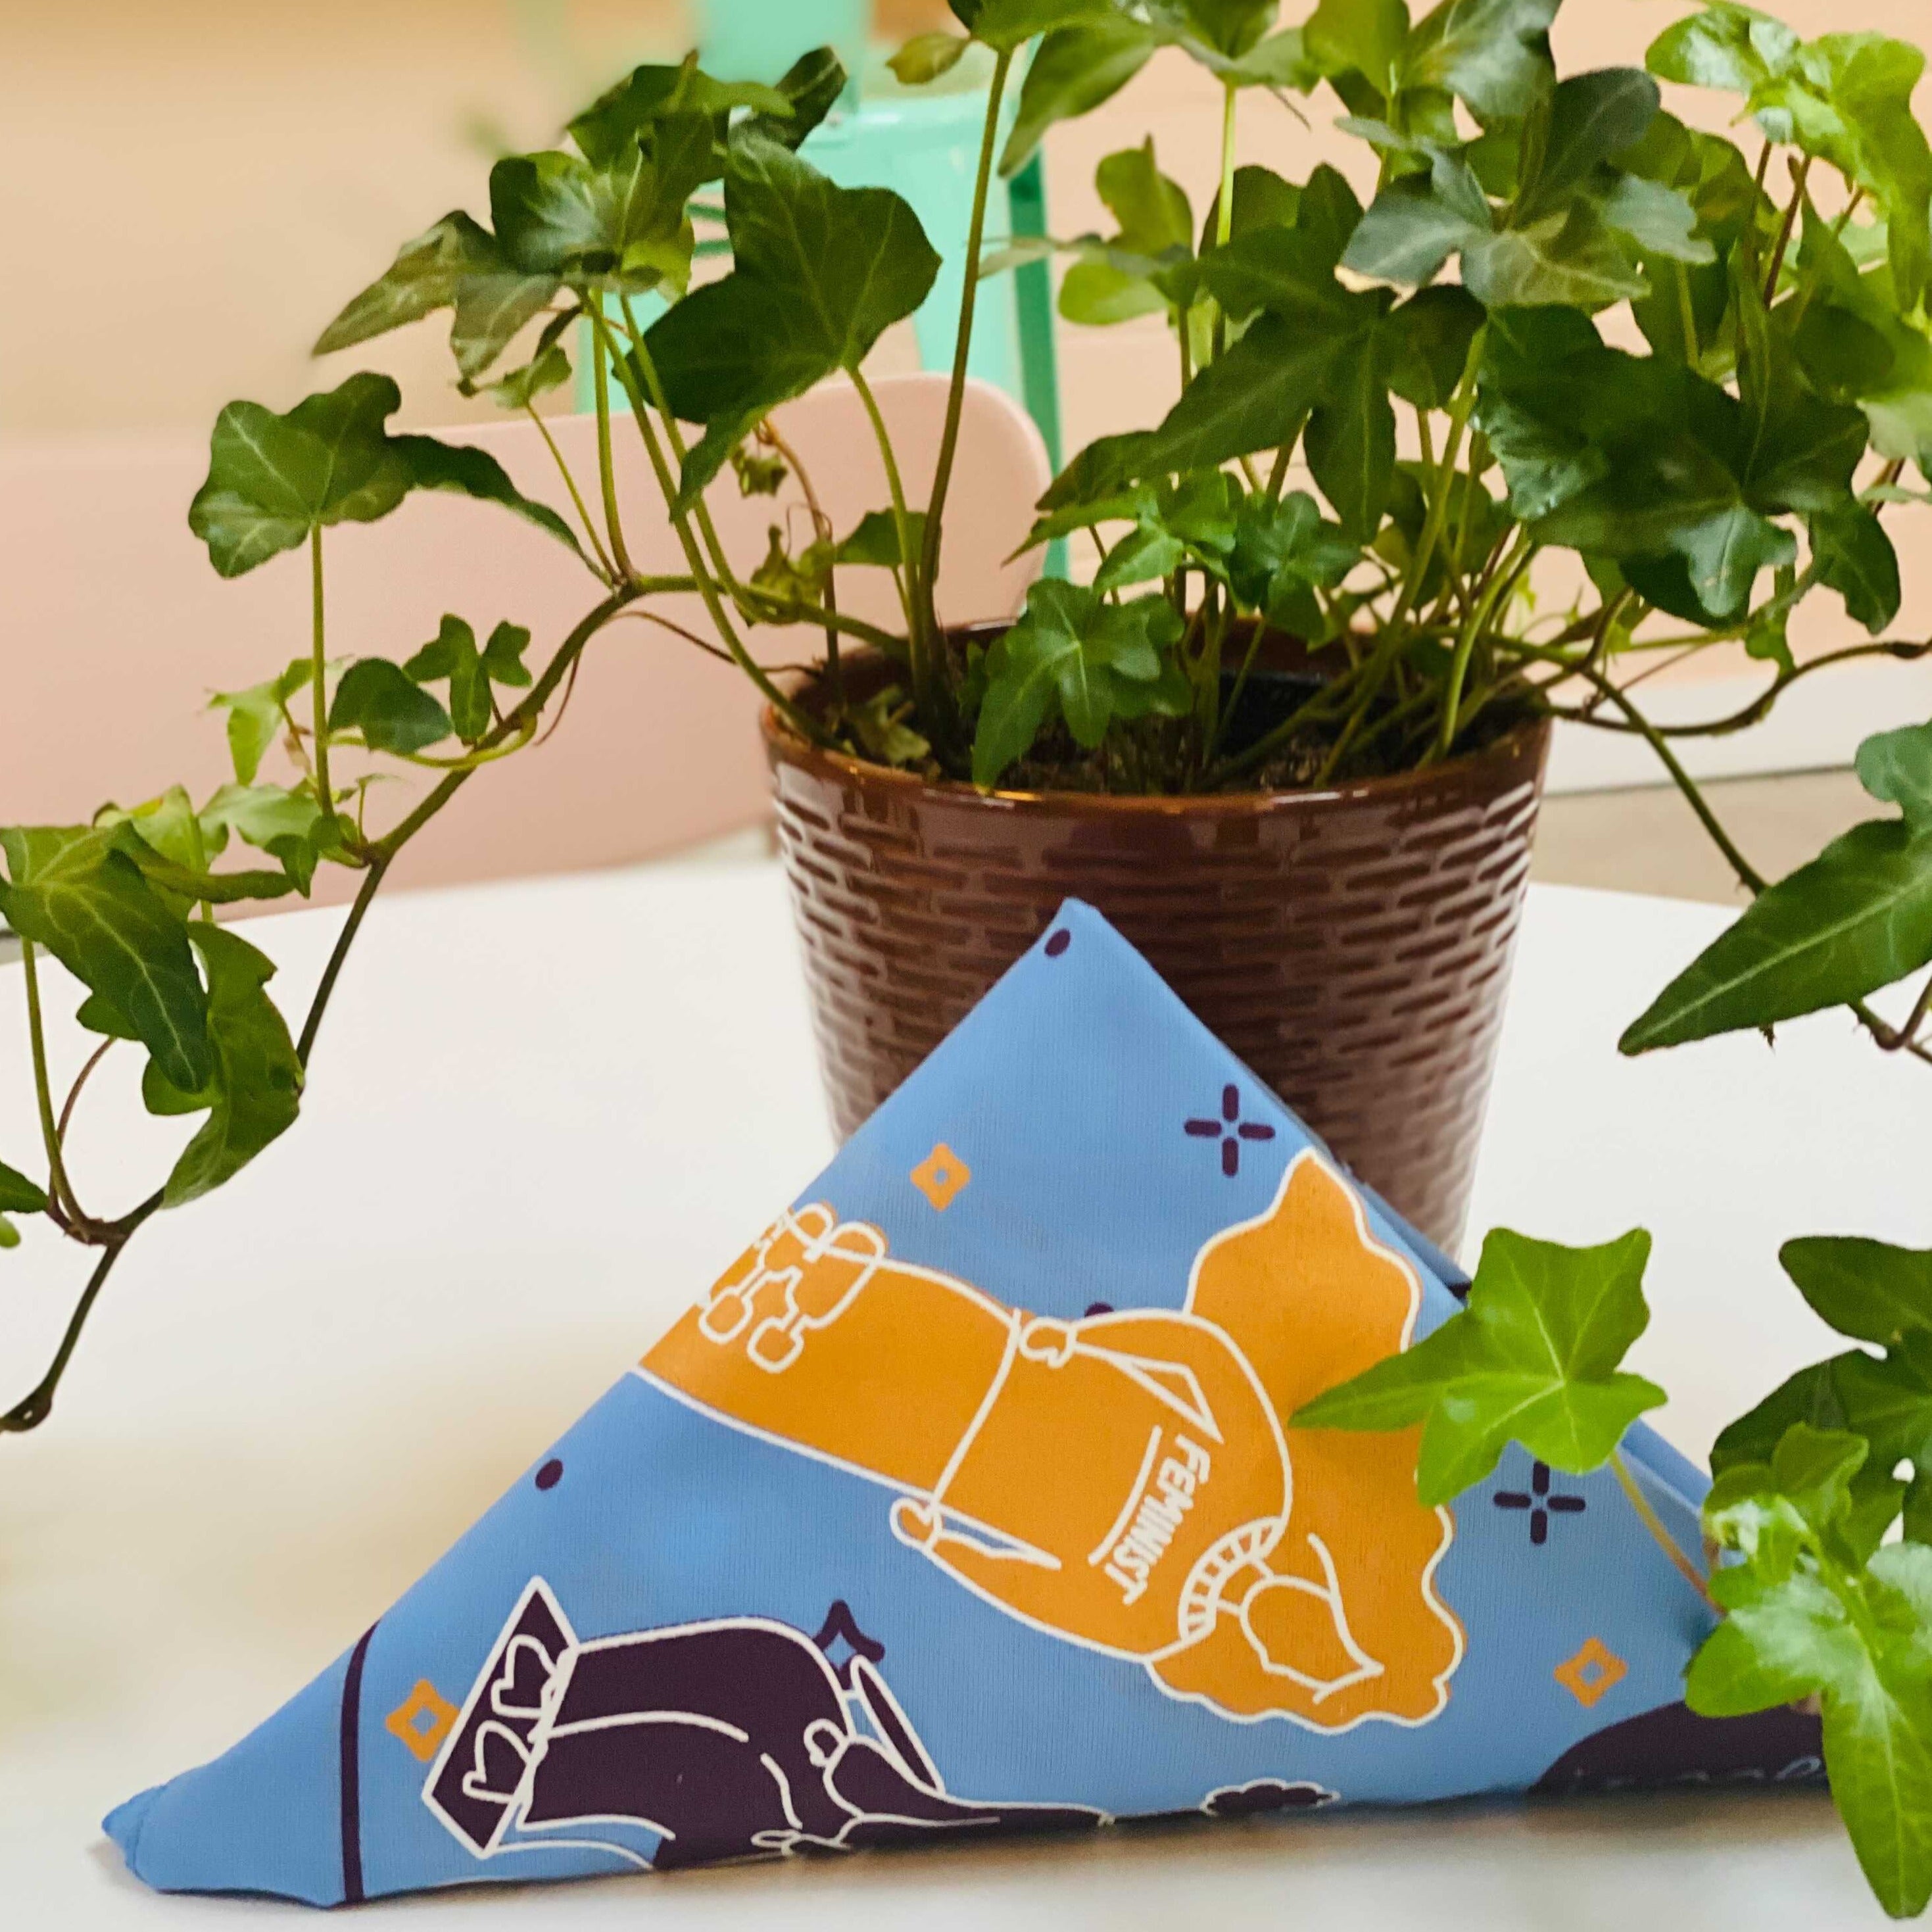 The Outrage's Accessibility for All bandana in blue folded on a table next to a plant.